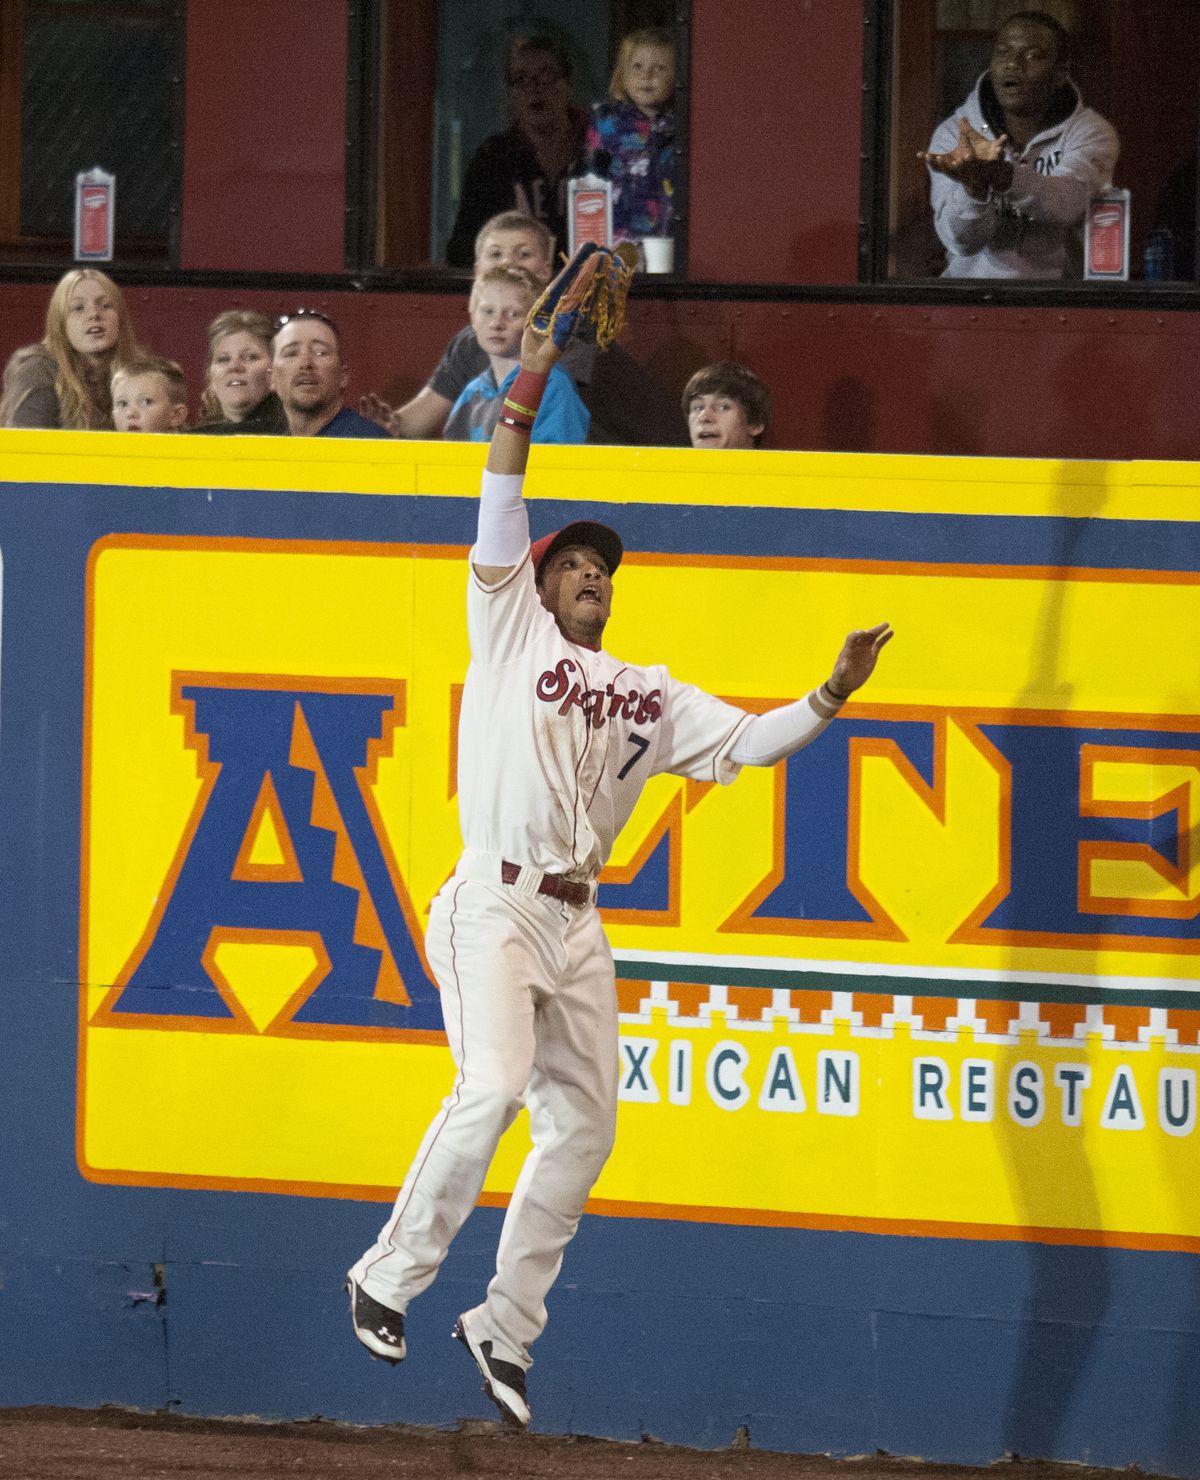 Spokane’s Diego Cedeno makes leaping catch in front of the right-field fence Thursday night. (Tyler Tjomsland)